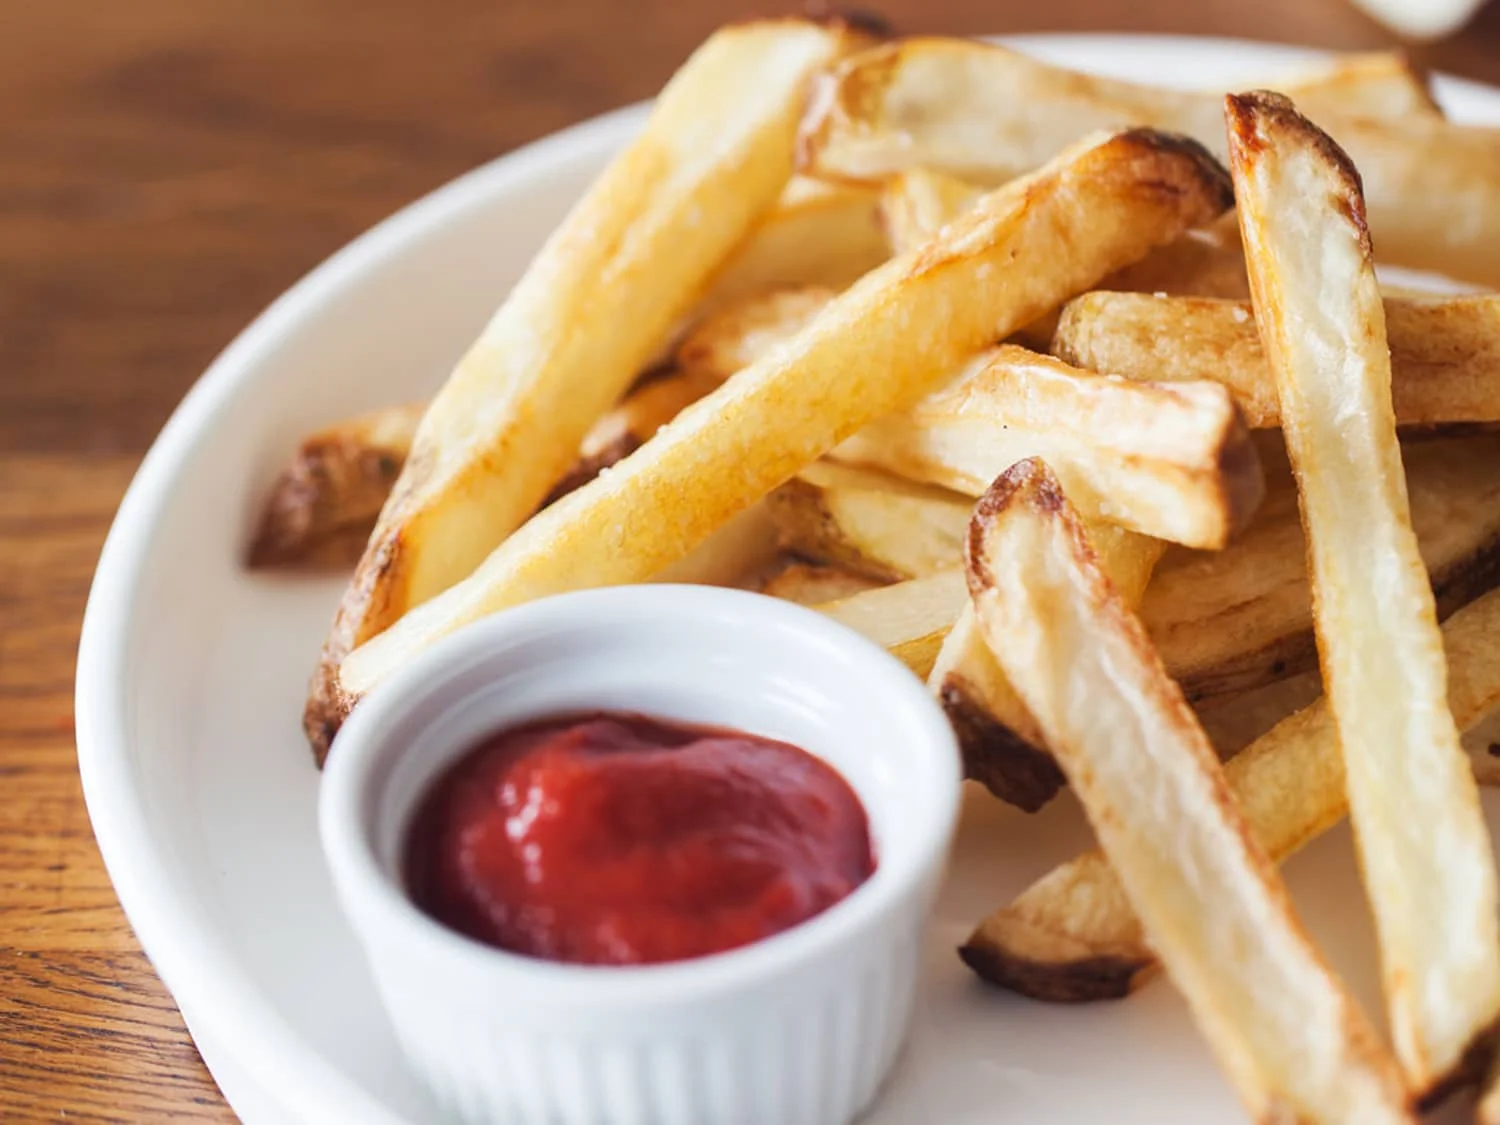 French Fries Golden Brown crunchy